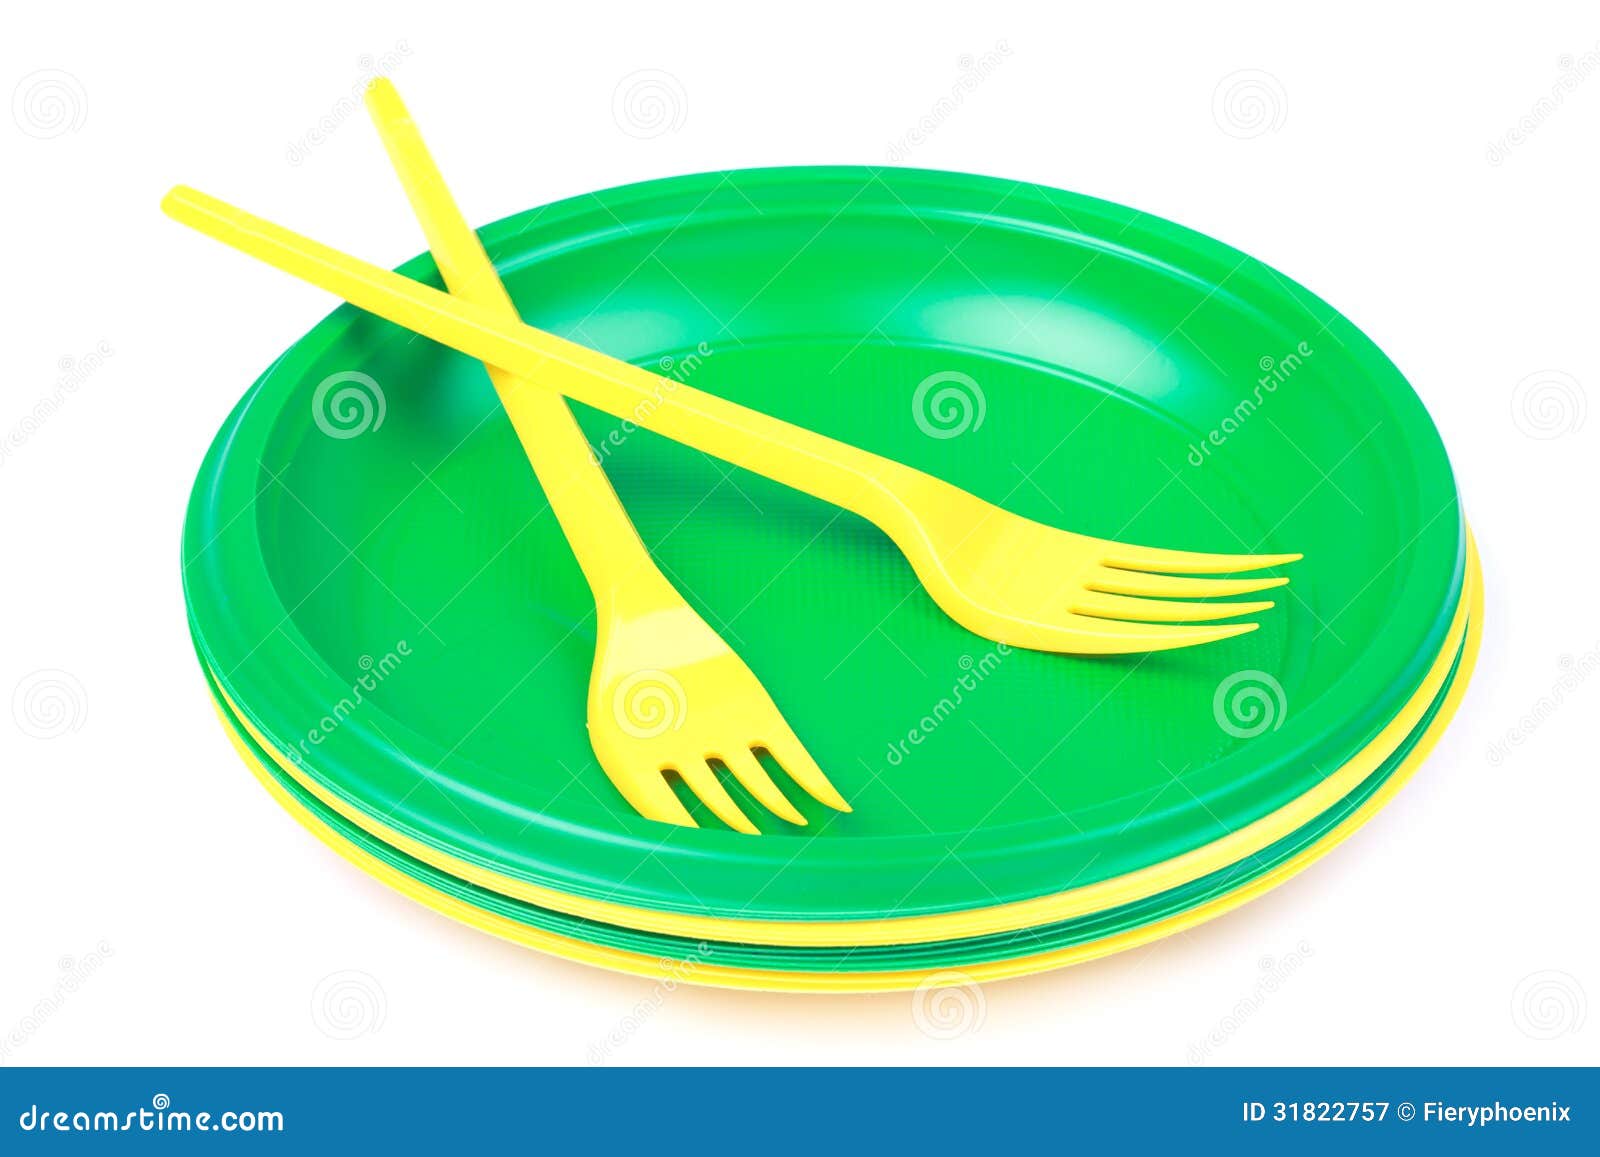 bright-green-yellow-plastic-disposable-tableware-plates-forks-white-background-close-up-31822757.jpg